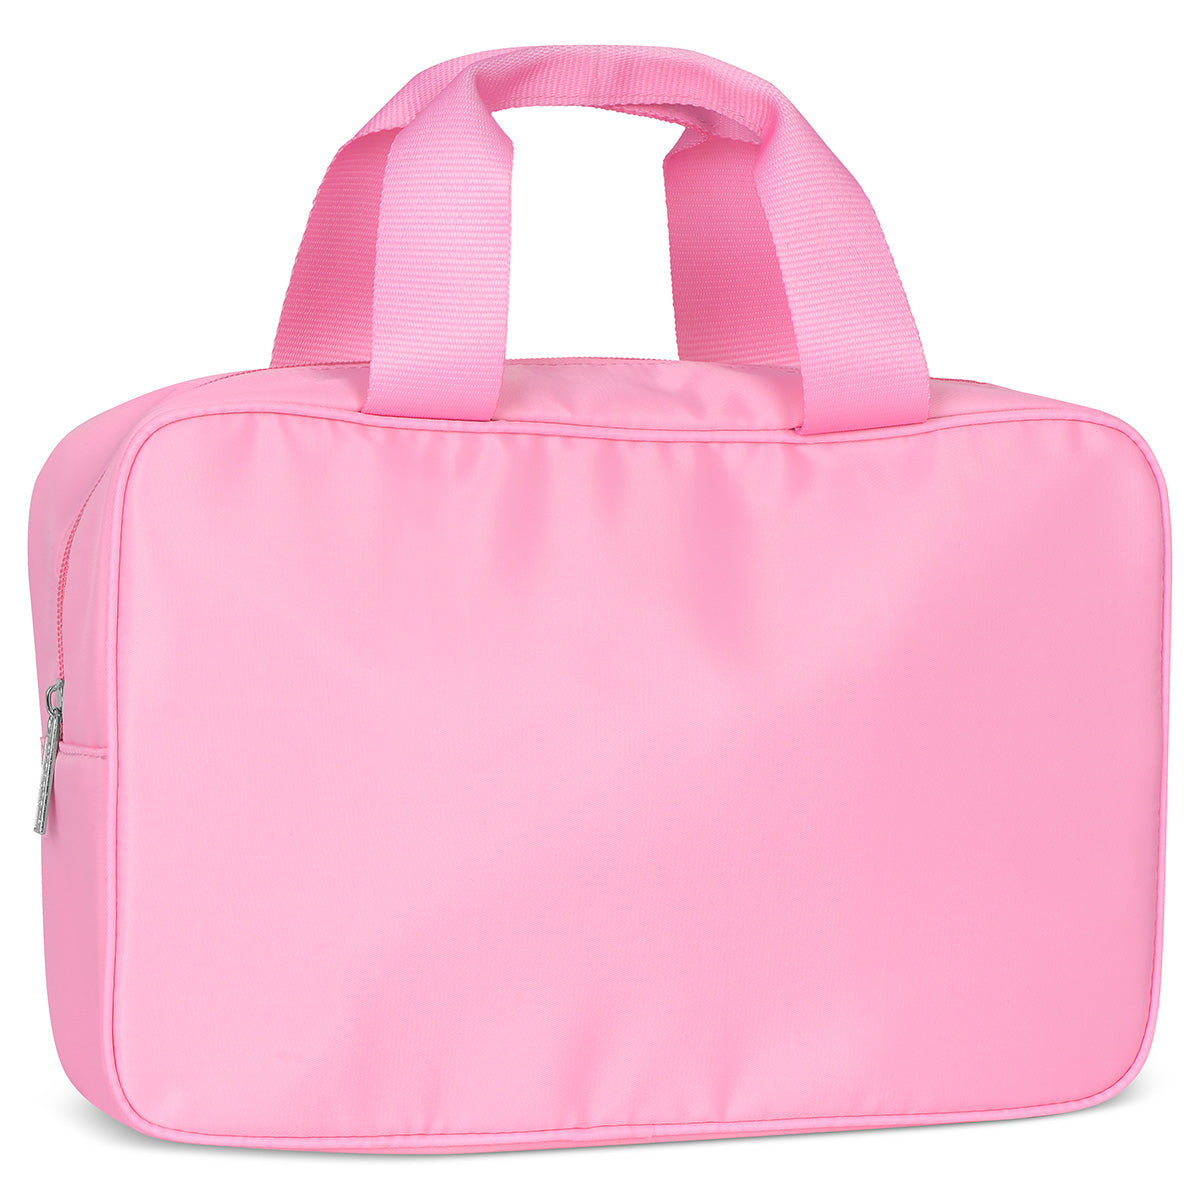 Pink Large Cosmetic Bag Cover